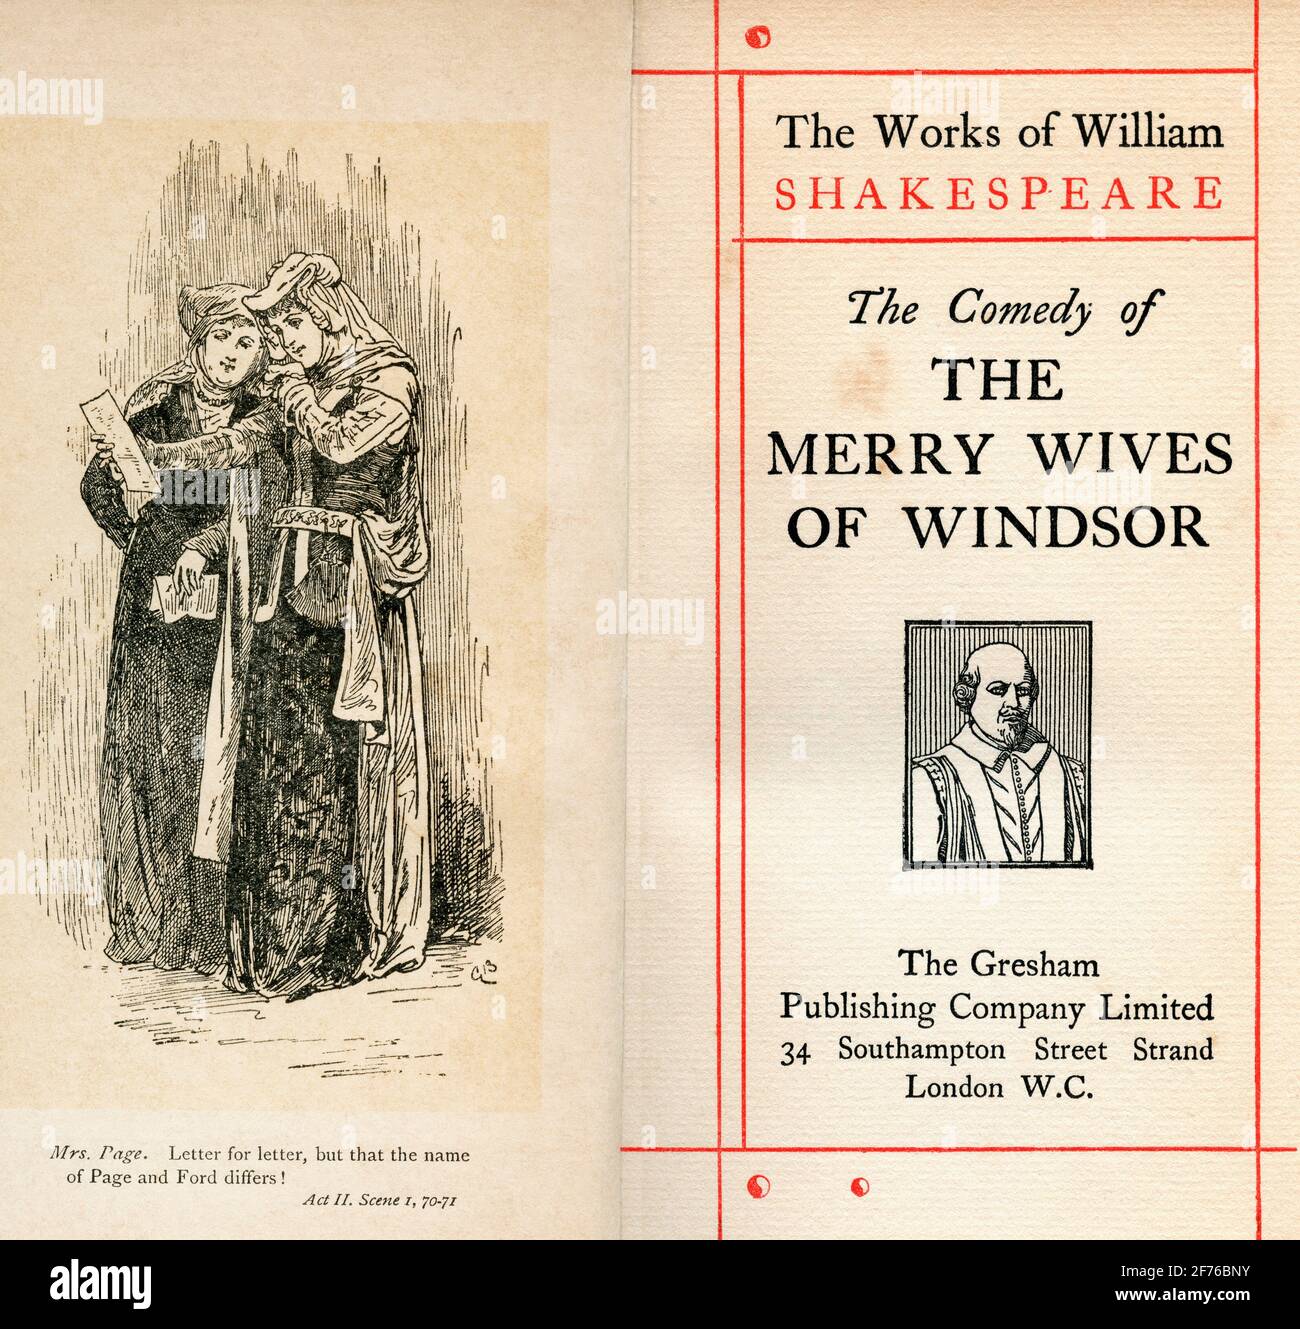 Frontispiece and title page from the Shakespeare play The Merry Wives of Windsor.  Act II. Scene 1. Mrs Page, "Letter for letter, but that the name of Page and Ford differs". From The Works of William Shakespeare, published c.1900 Stock Photo